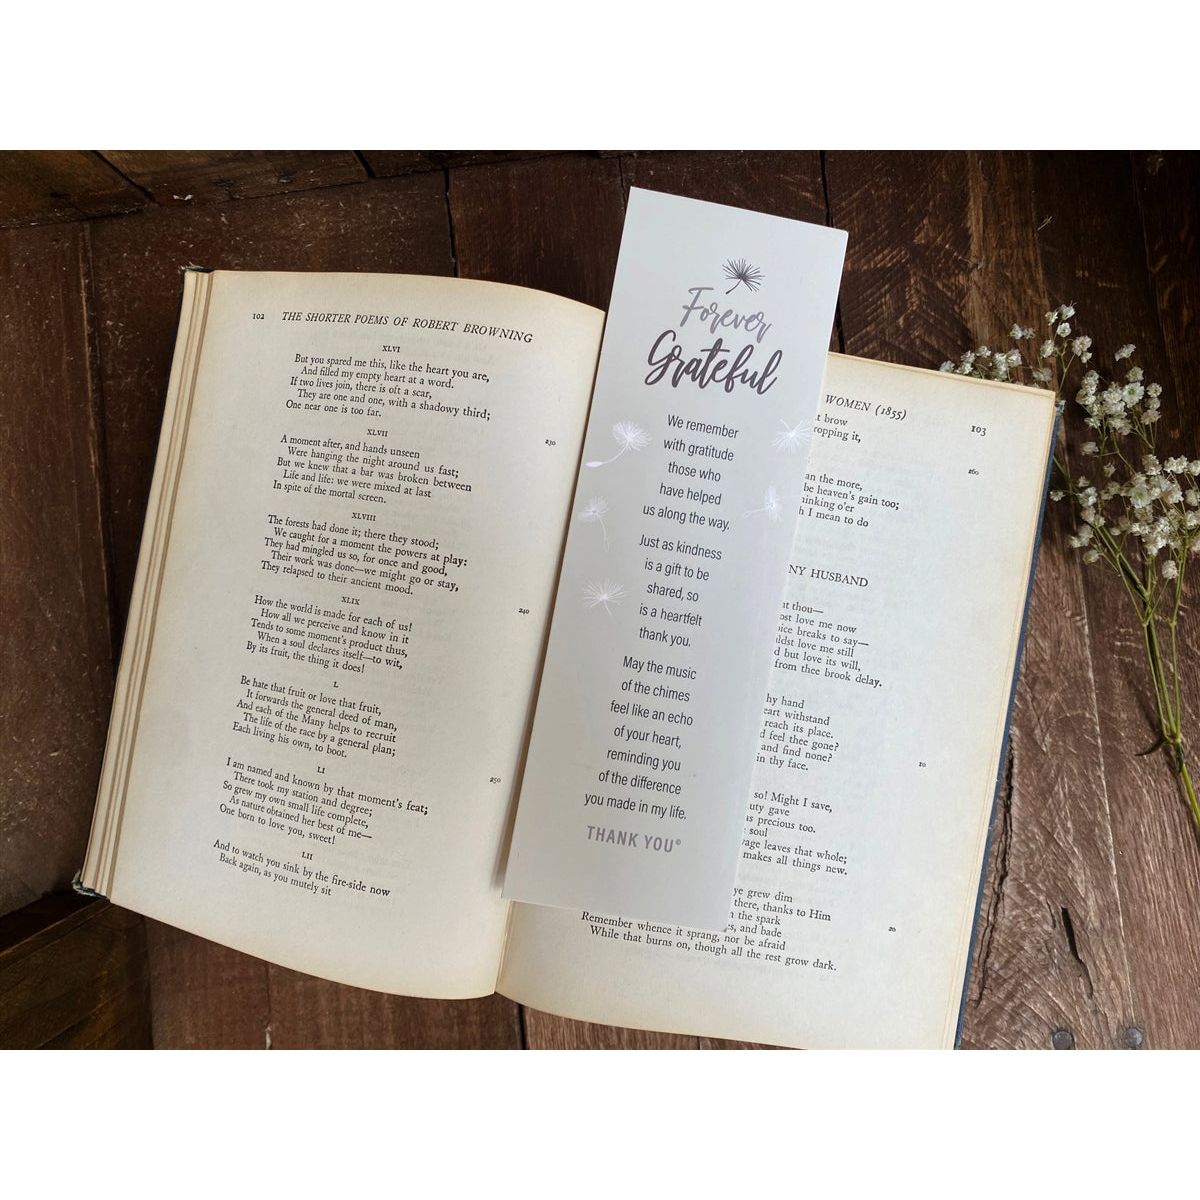 Forever Grateful poem card being used as a bookmark.